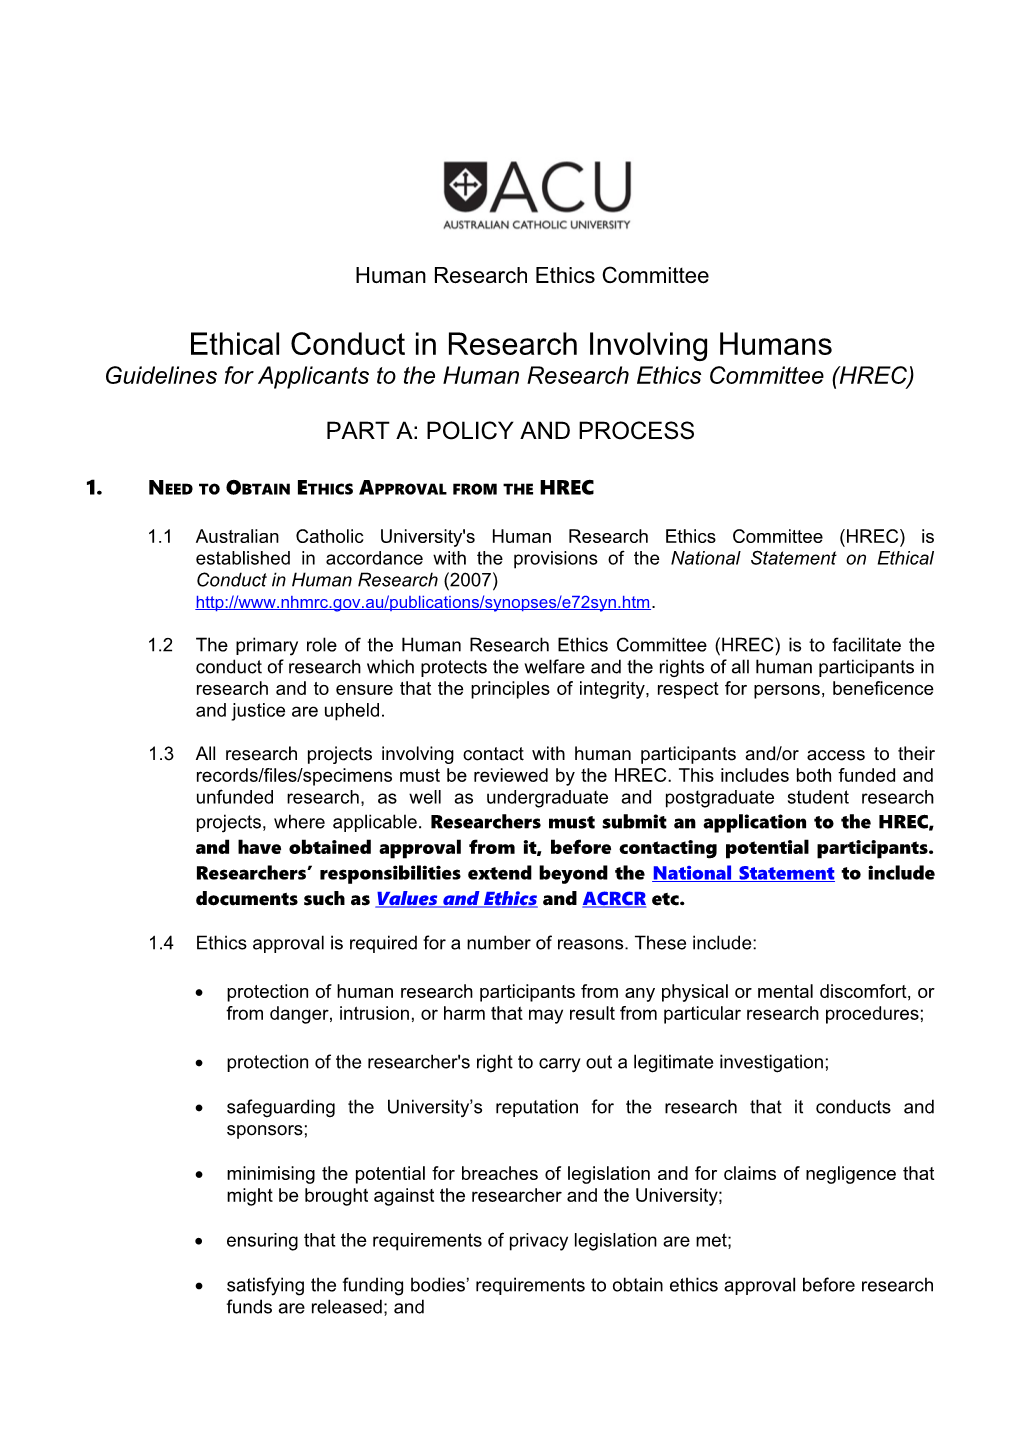 Ethical Conduct in Research Involving Humans Guidelines